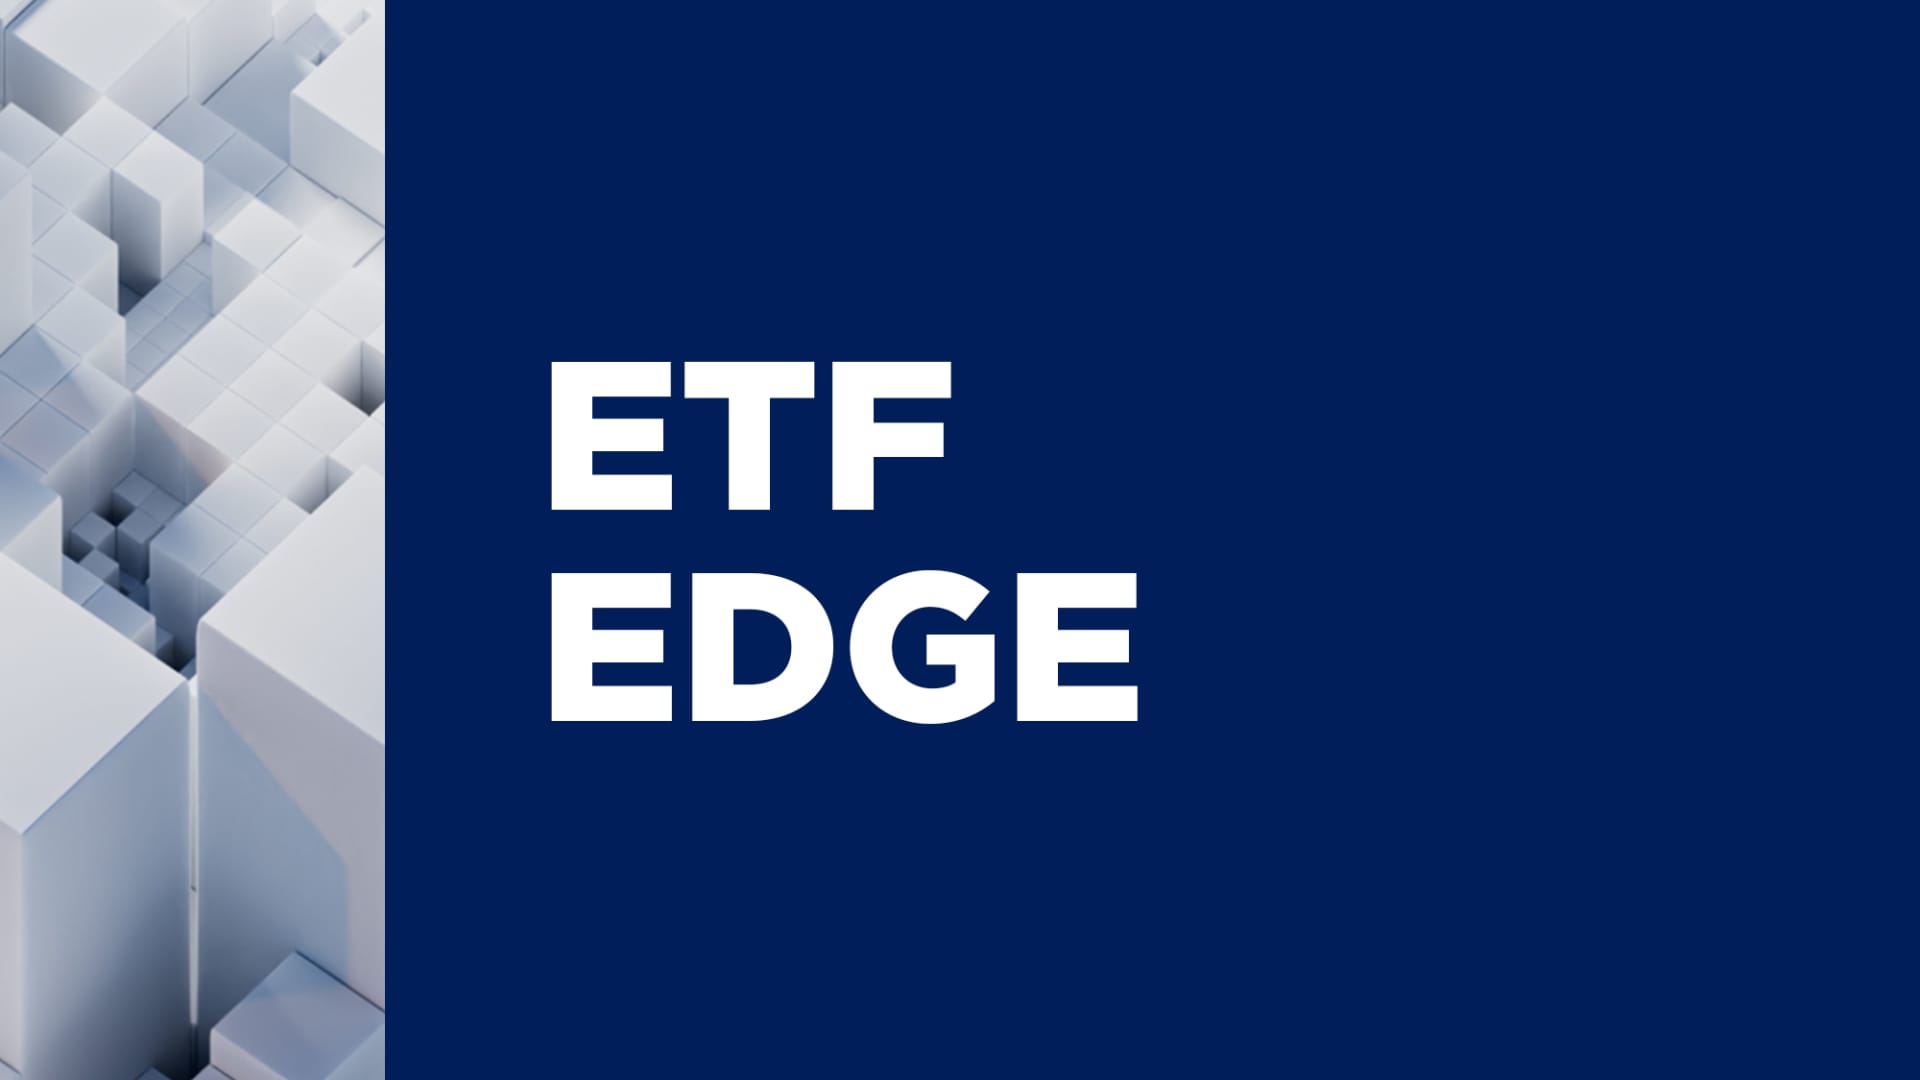 Watch now: ETF Edge on how Middle East concerns, inflation & reflation has commodities on the move